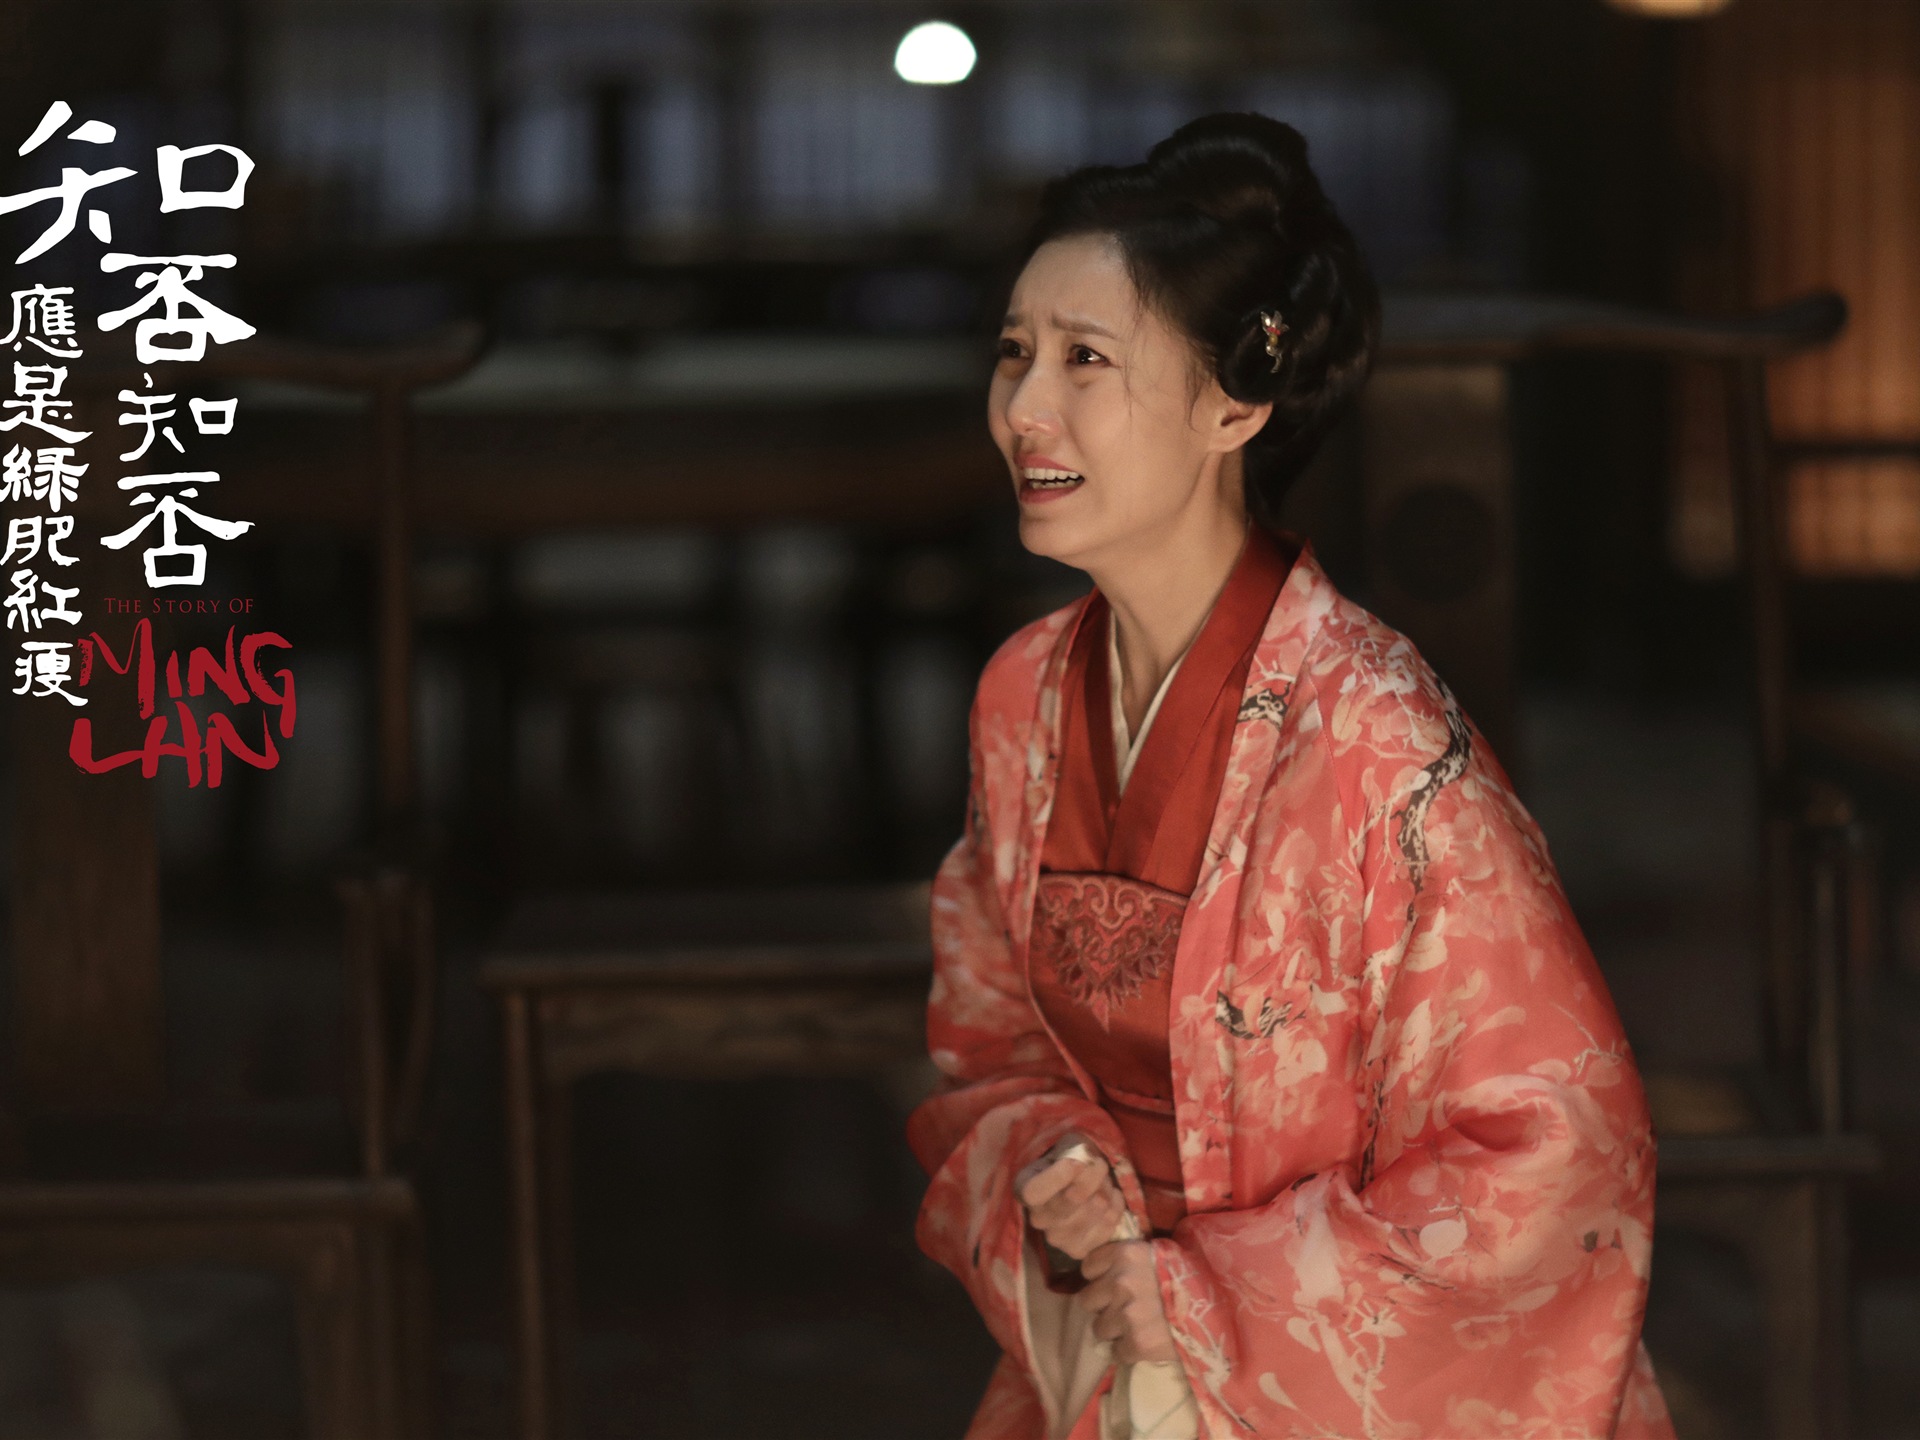 The Story Of MingLan, TV series HD wallpapers #17 - 1920x1440